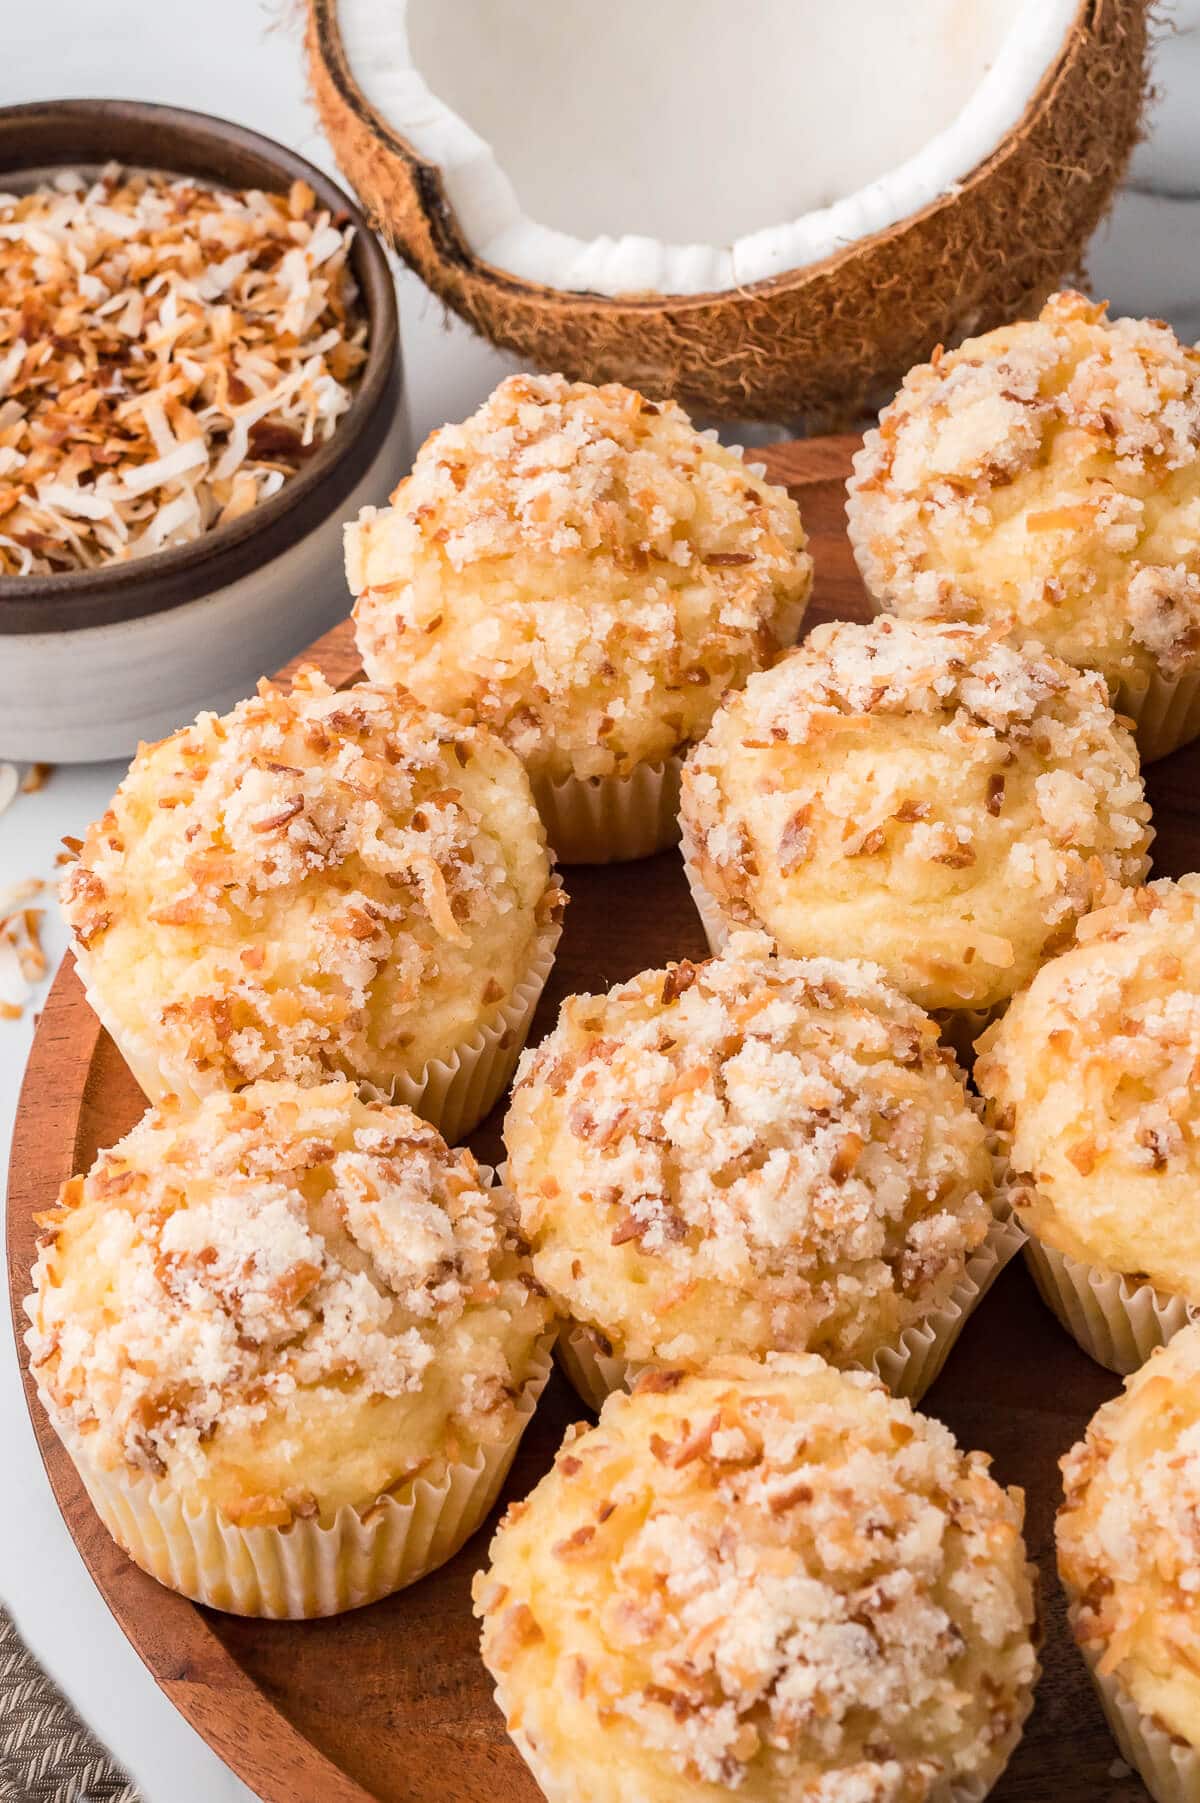 Toasted coconut muffins on a wooden platter.